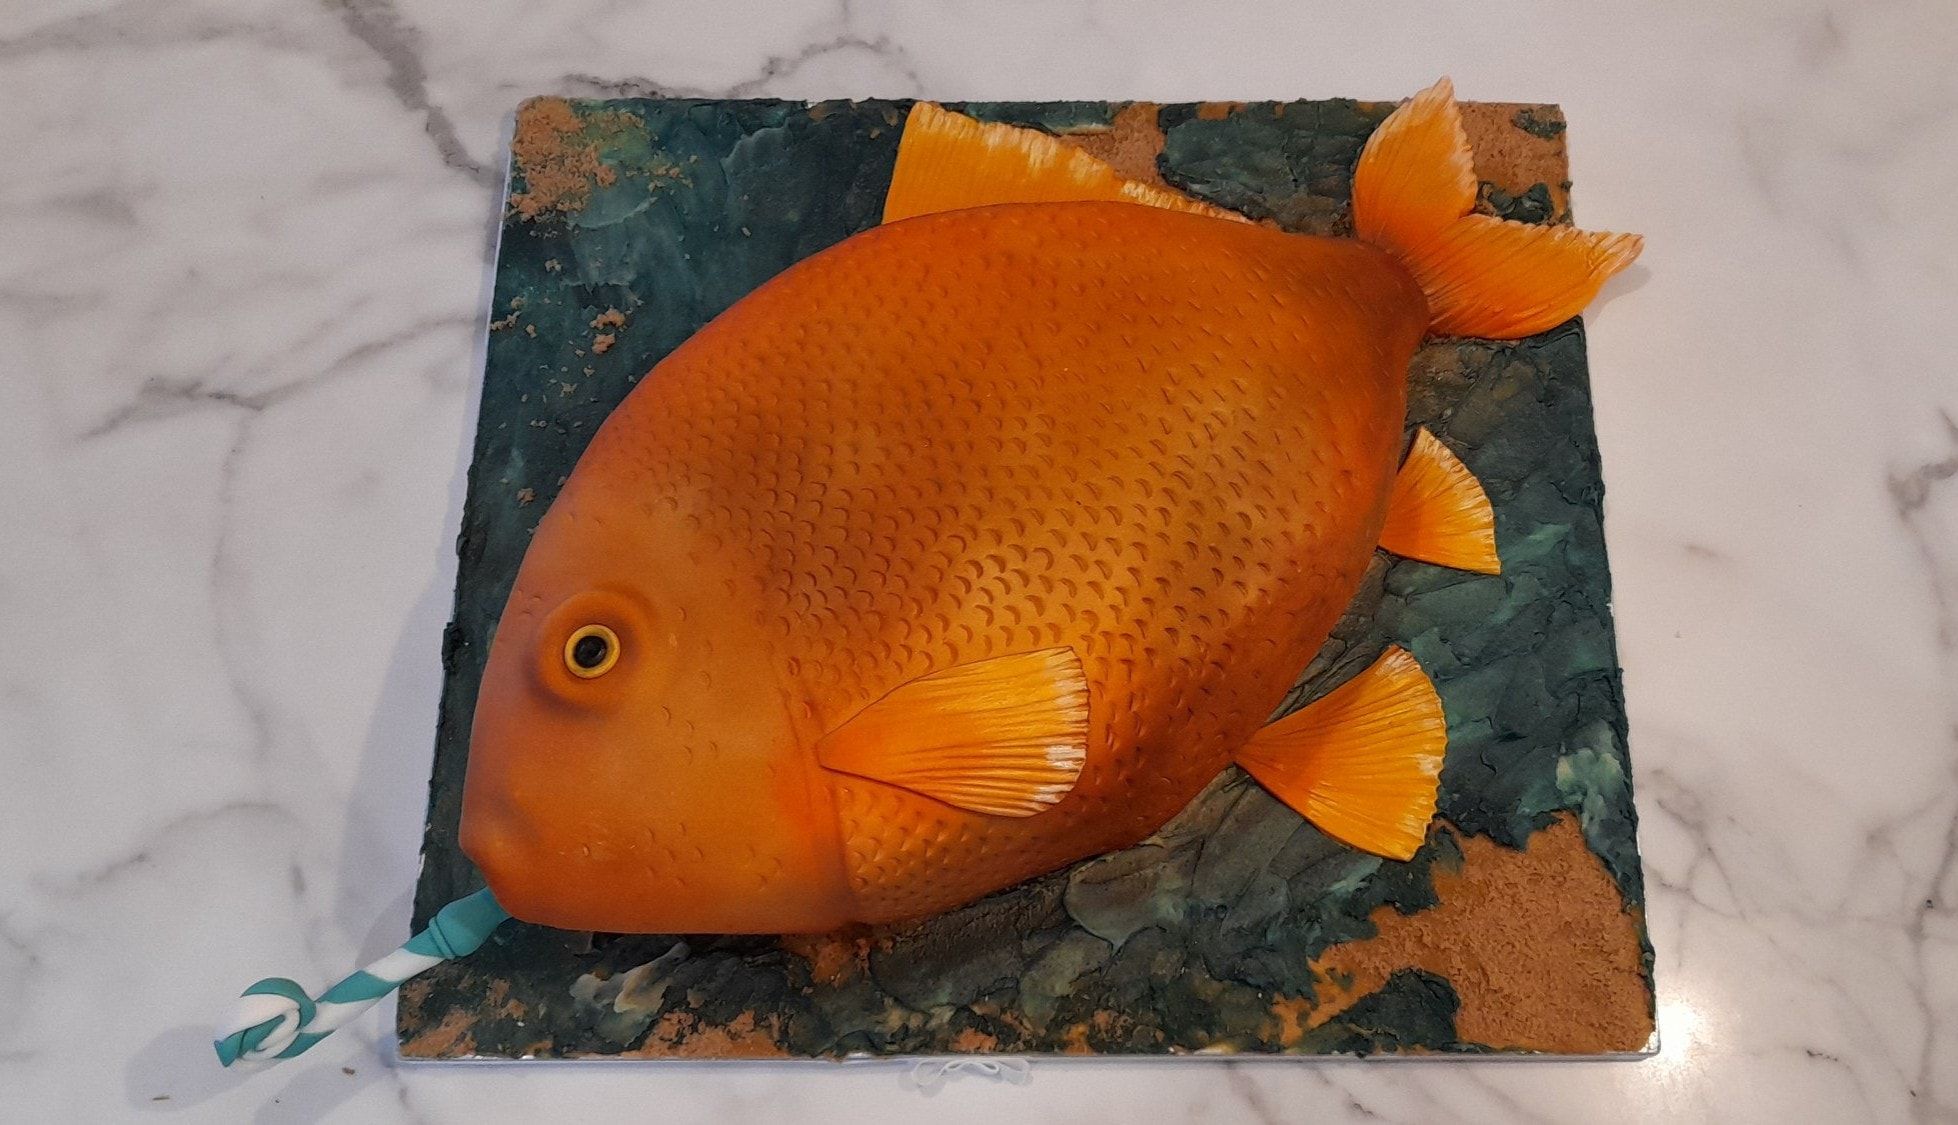 Gold fish cakes